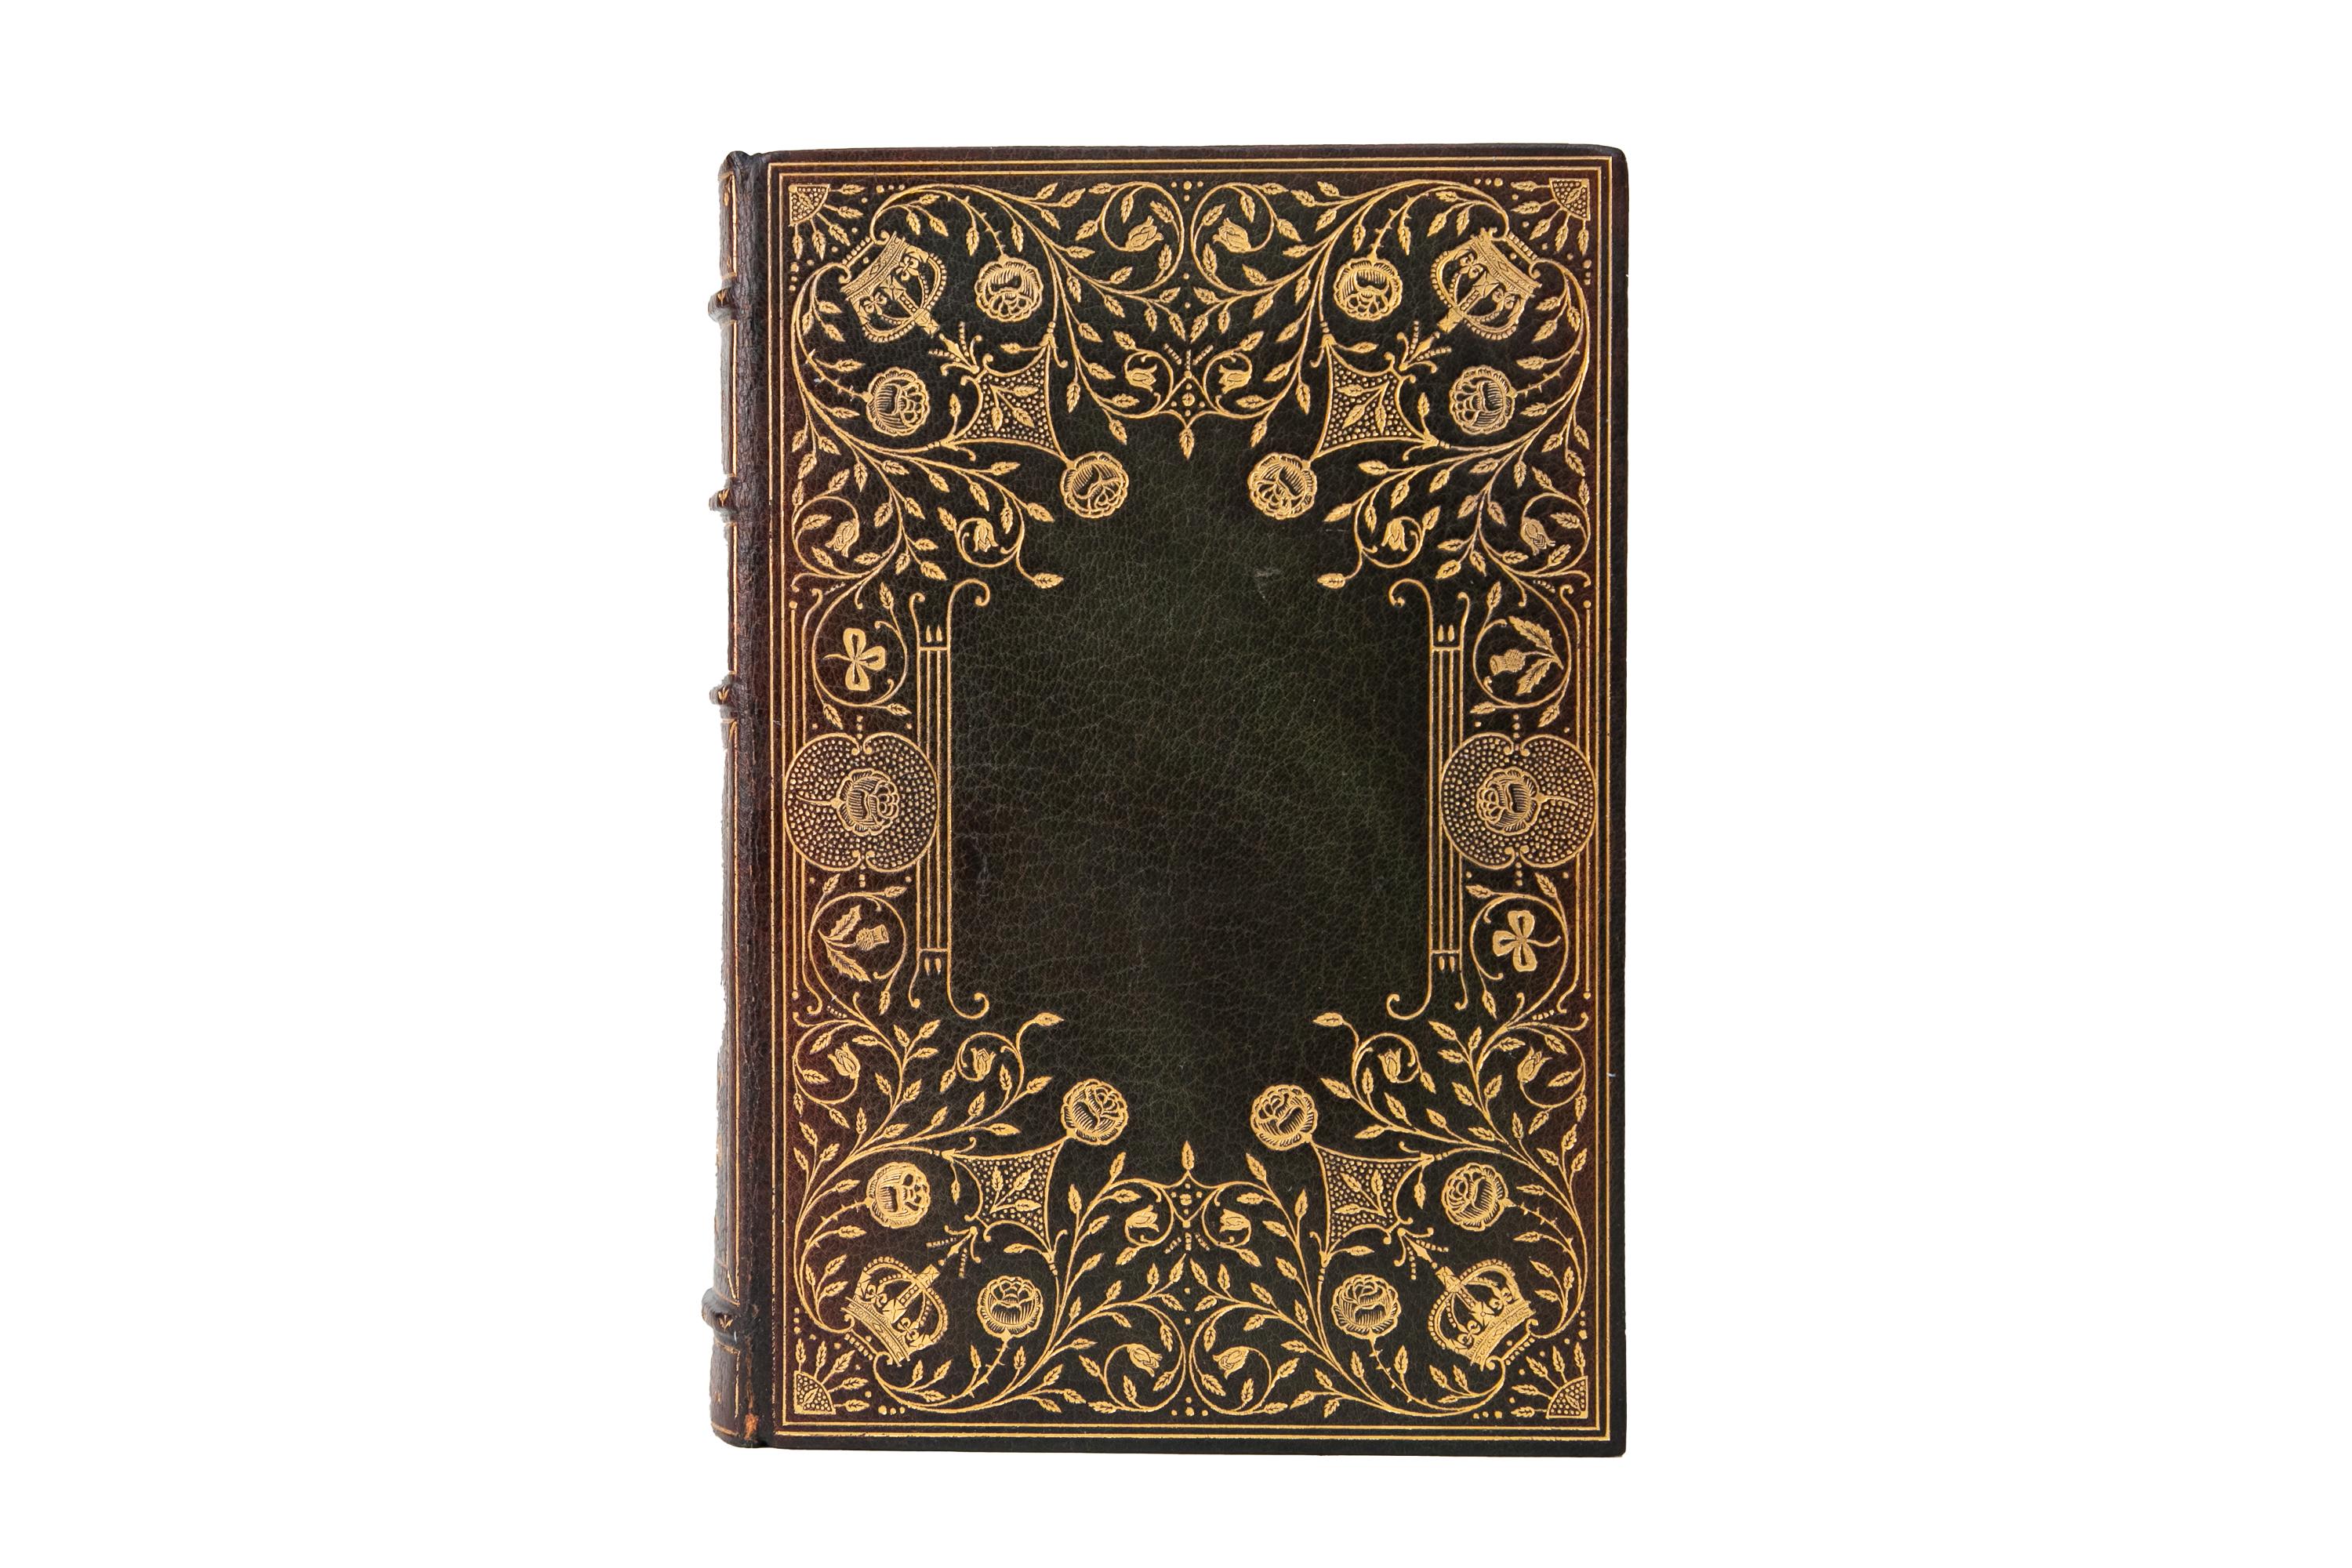 32 Volumes. Charles Dickens, The Works. Editors Autograph Edition. Bound in full green morocco with the covers displaying ornate floral gilt-tooled details. Raised band spine with ornate gilt-tooled details. Top edges are gilded with ornately